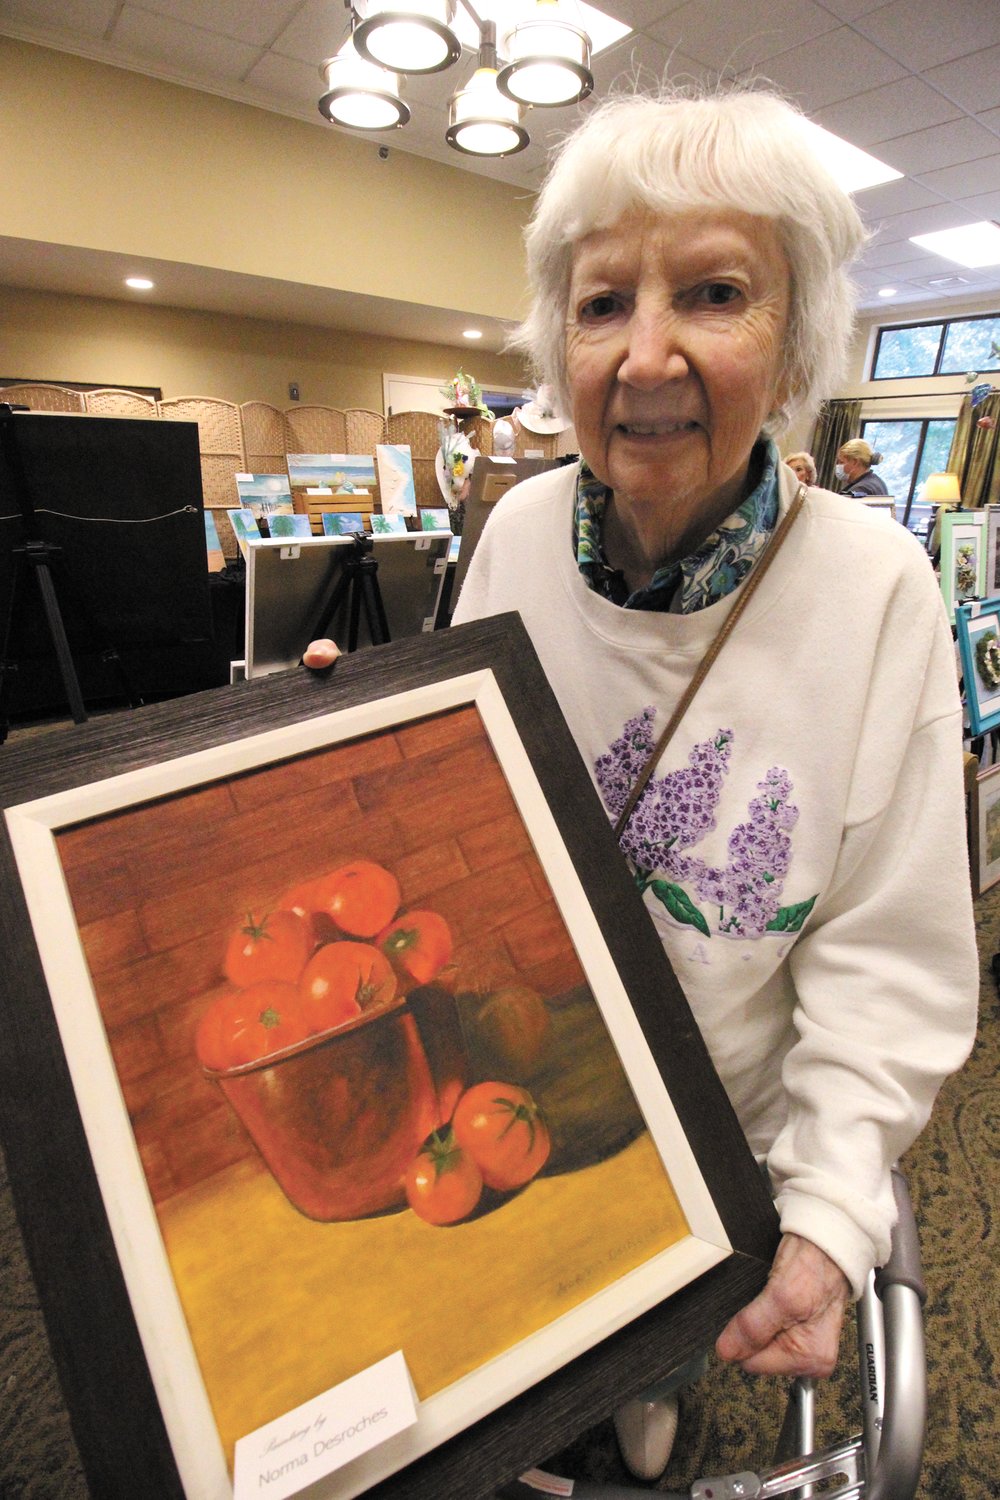 IN SEASON: Resident Norma DesRoches displays her painting of ripe tomatoes.